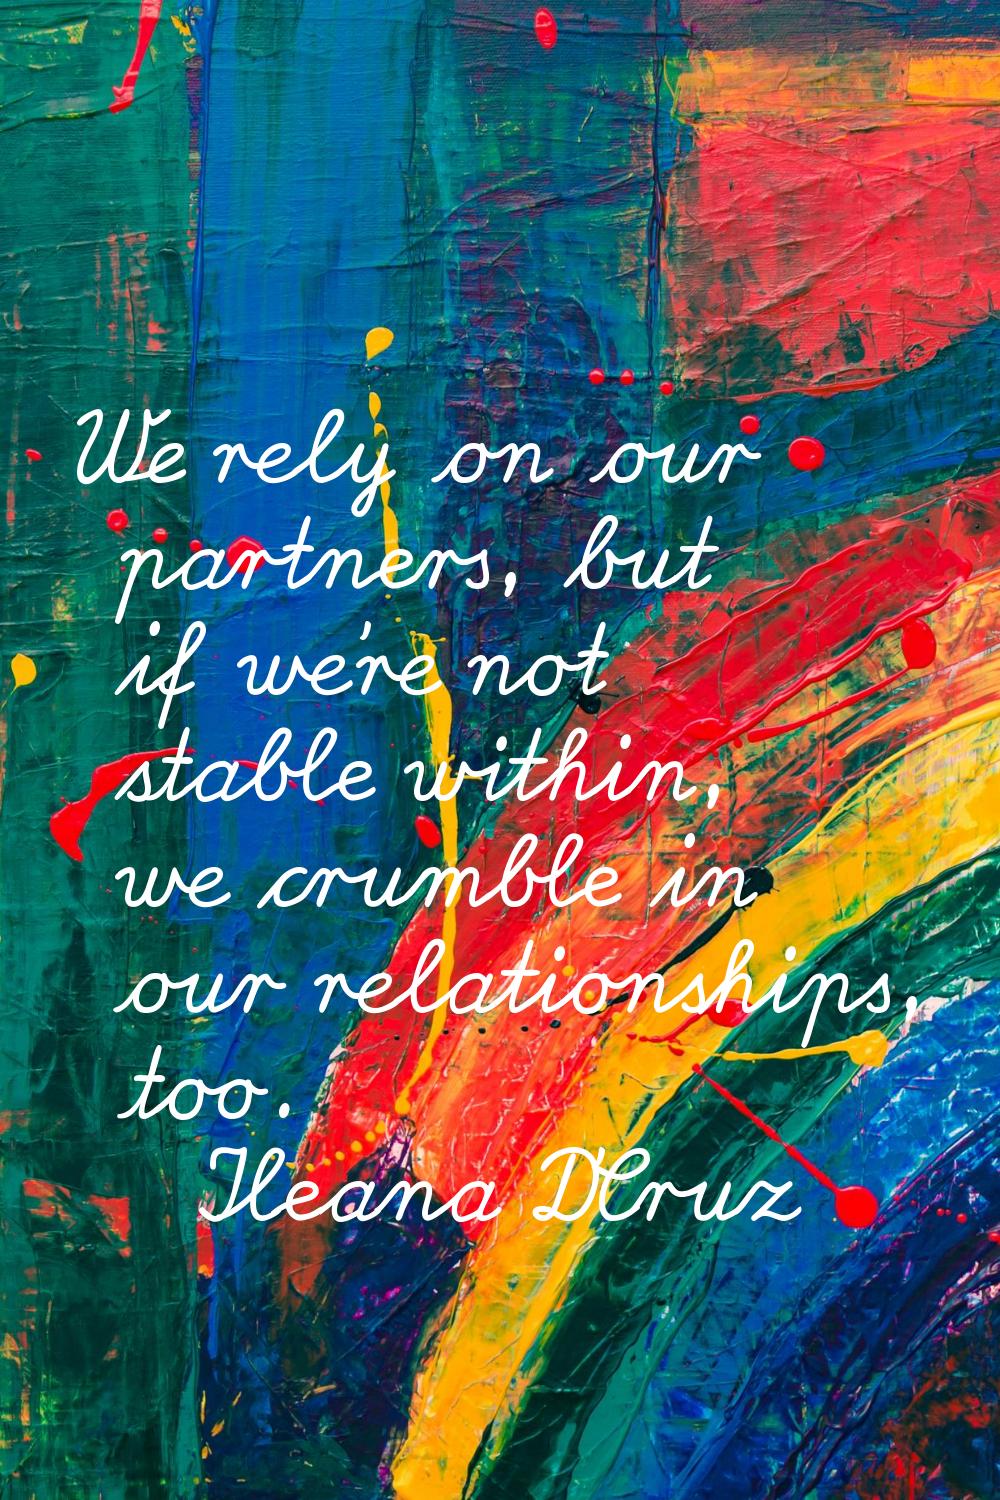 We rely on our partners, but if we're not stable within, we crumble in our relationships, too.